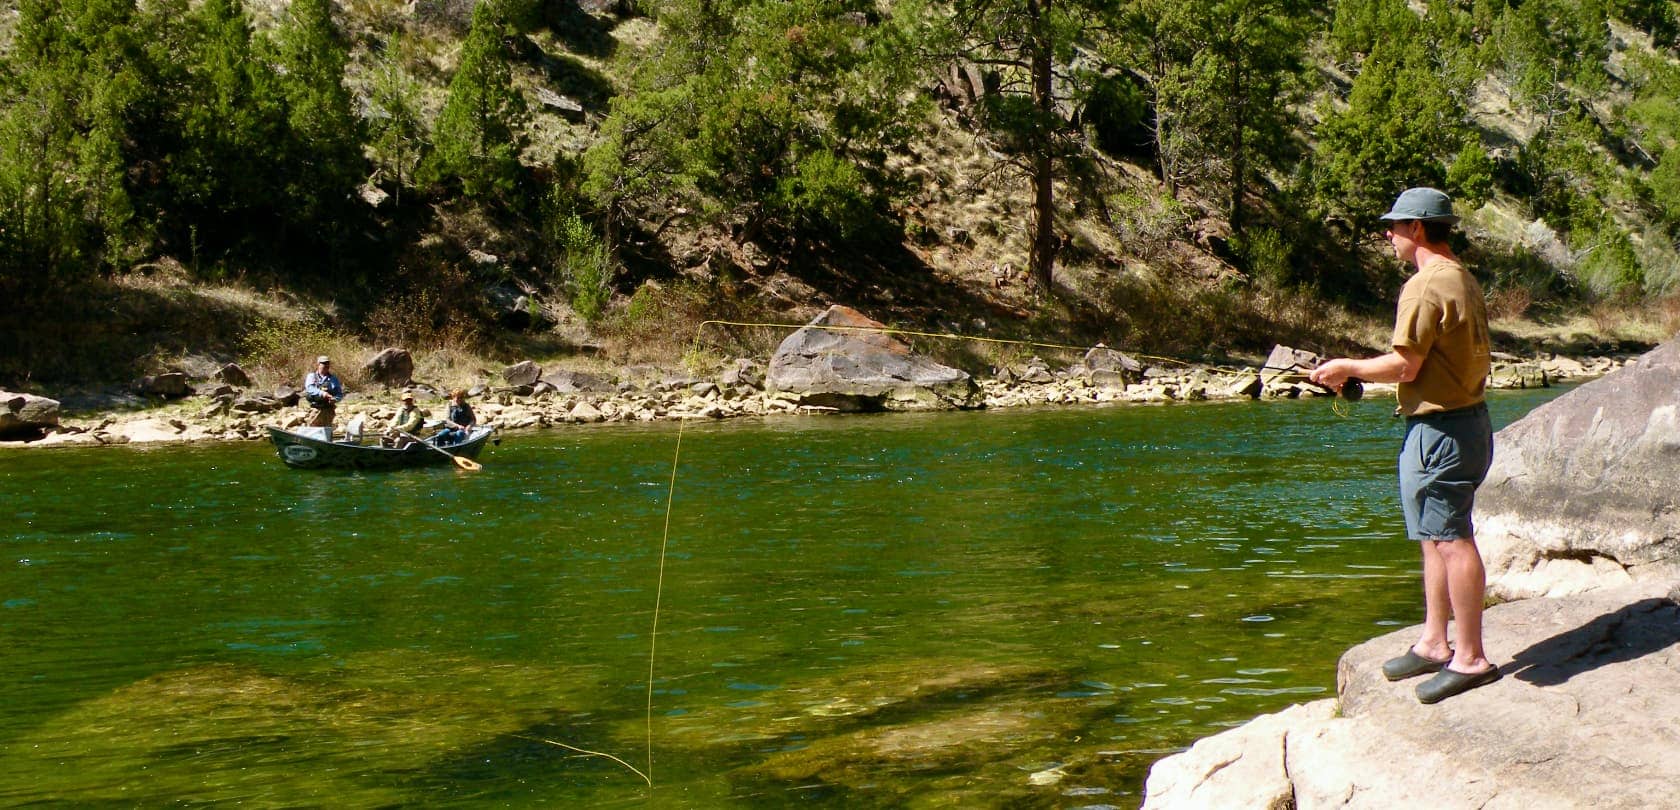 Man fishing in a river in Wyoming